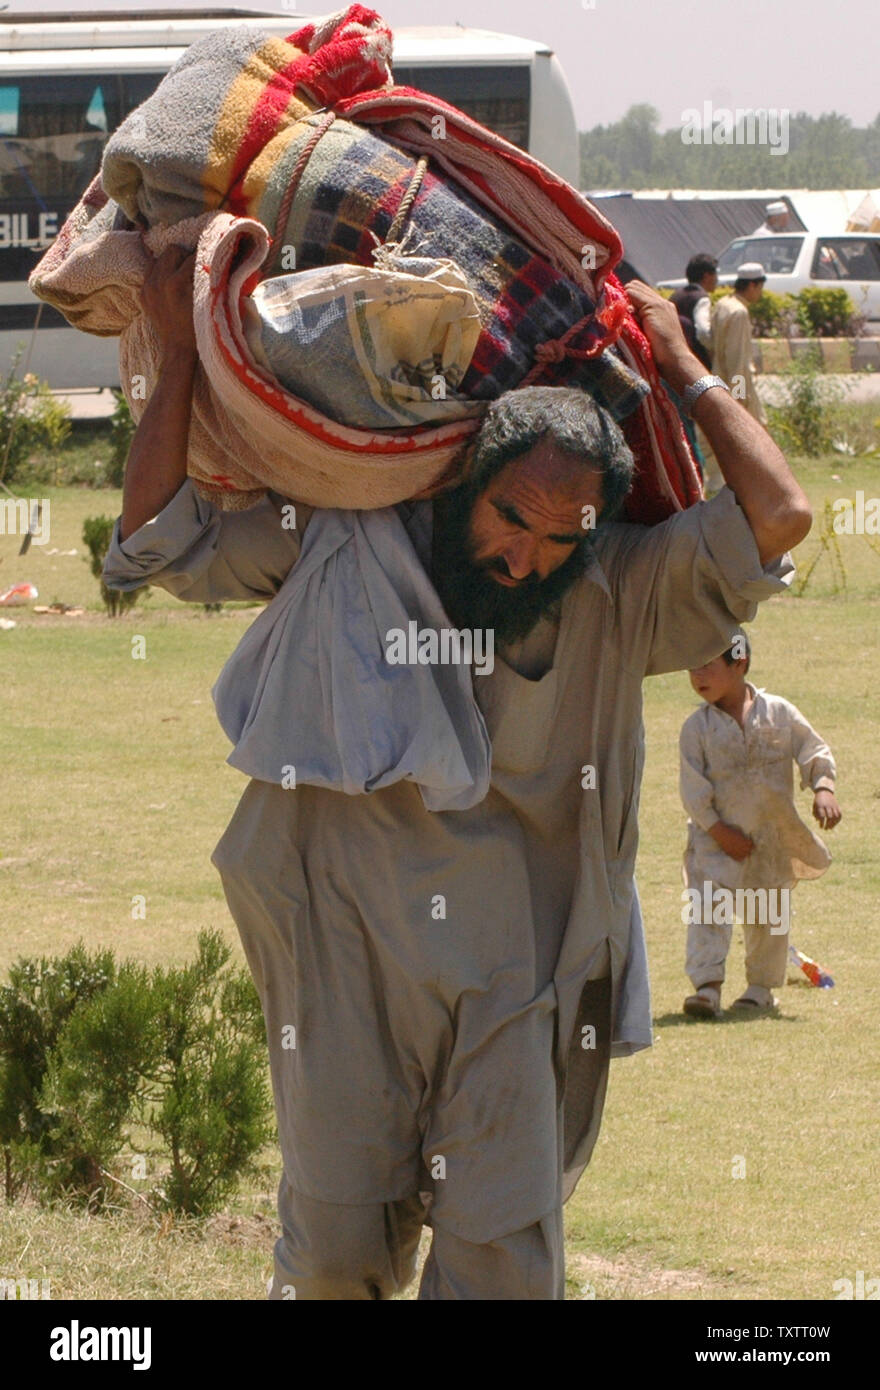 Local residents flee from Mingora, the main town of Pakistan's troubled Swat Valley, to Mardan, Pakistan on  May 11, 2009.  About 360,000 people have left the troubled region as the fight continues between the Pakistani army and the Taliban. (UPI Photo/Sajjad Ali Qureshi) Stock Photo